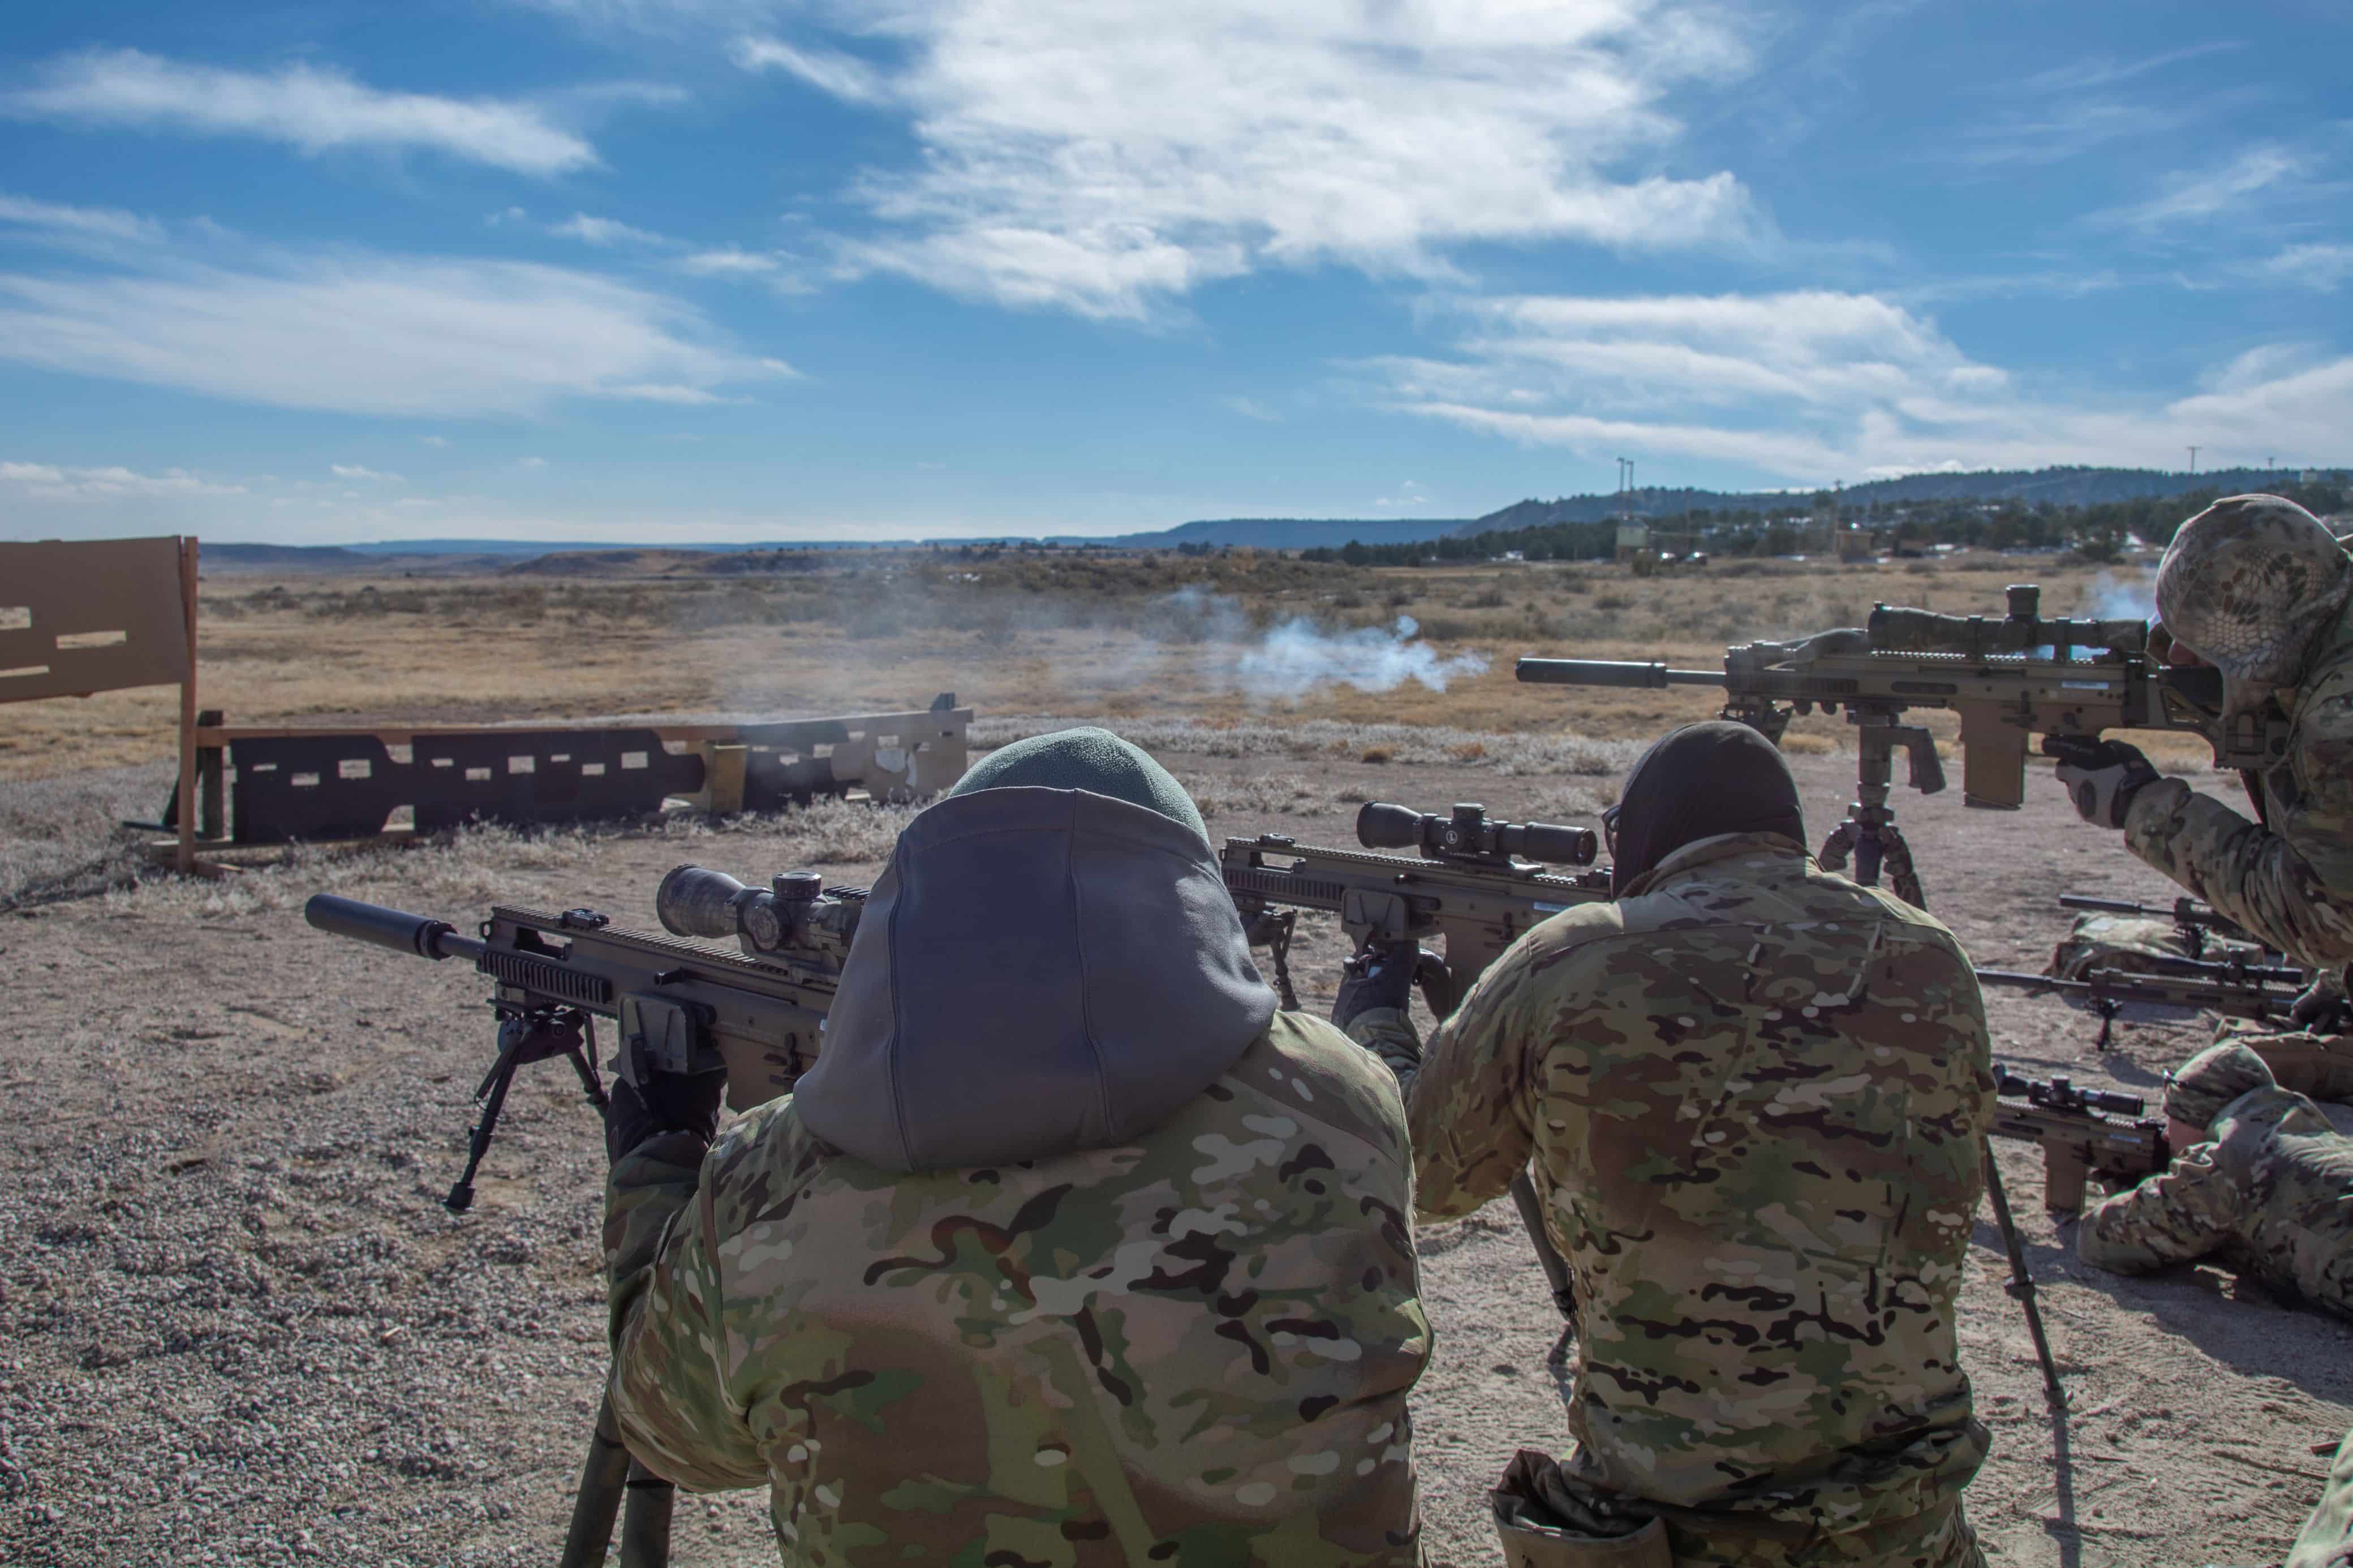 U.S. Army Operators assigned to 10th Special Forces Group (Airborne) perform barrier hole and tripod training on Fort Carson, Colorado, Dec. 6, 2018. Firing through barrier holes simulates firing through walls to engage long distance targets. (U.S. Army photo by Spc. Jacob Krone)